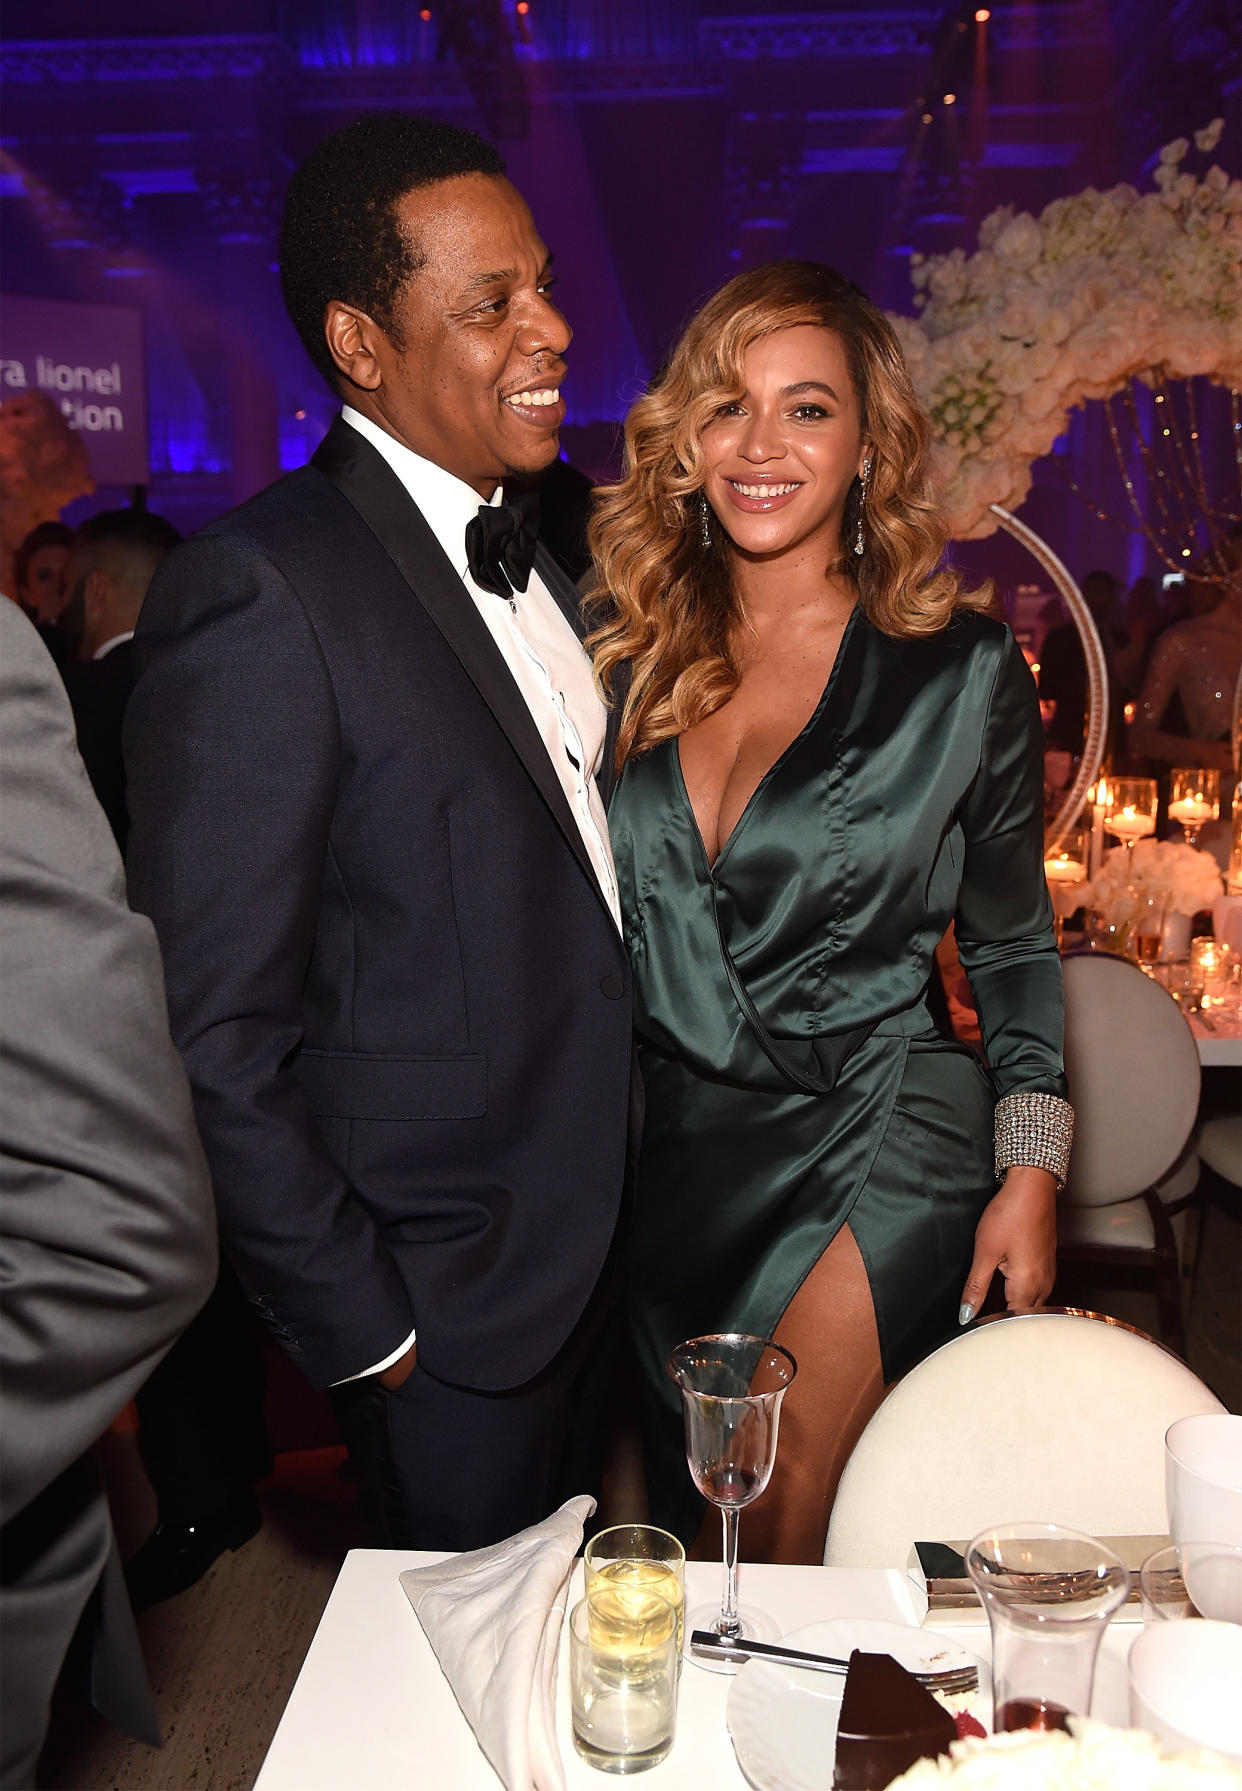 Beyoncé and JAY-Z attend Rihanna’s 3rd Annual Diamond Ball benefitting the Clara Lionel Foundation at Cipriani Wall Street in NYC on September 14, 2017. (Photo: Kevin Mazur/Getty Images for Clara Lionel Foundation)